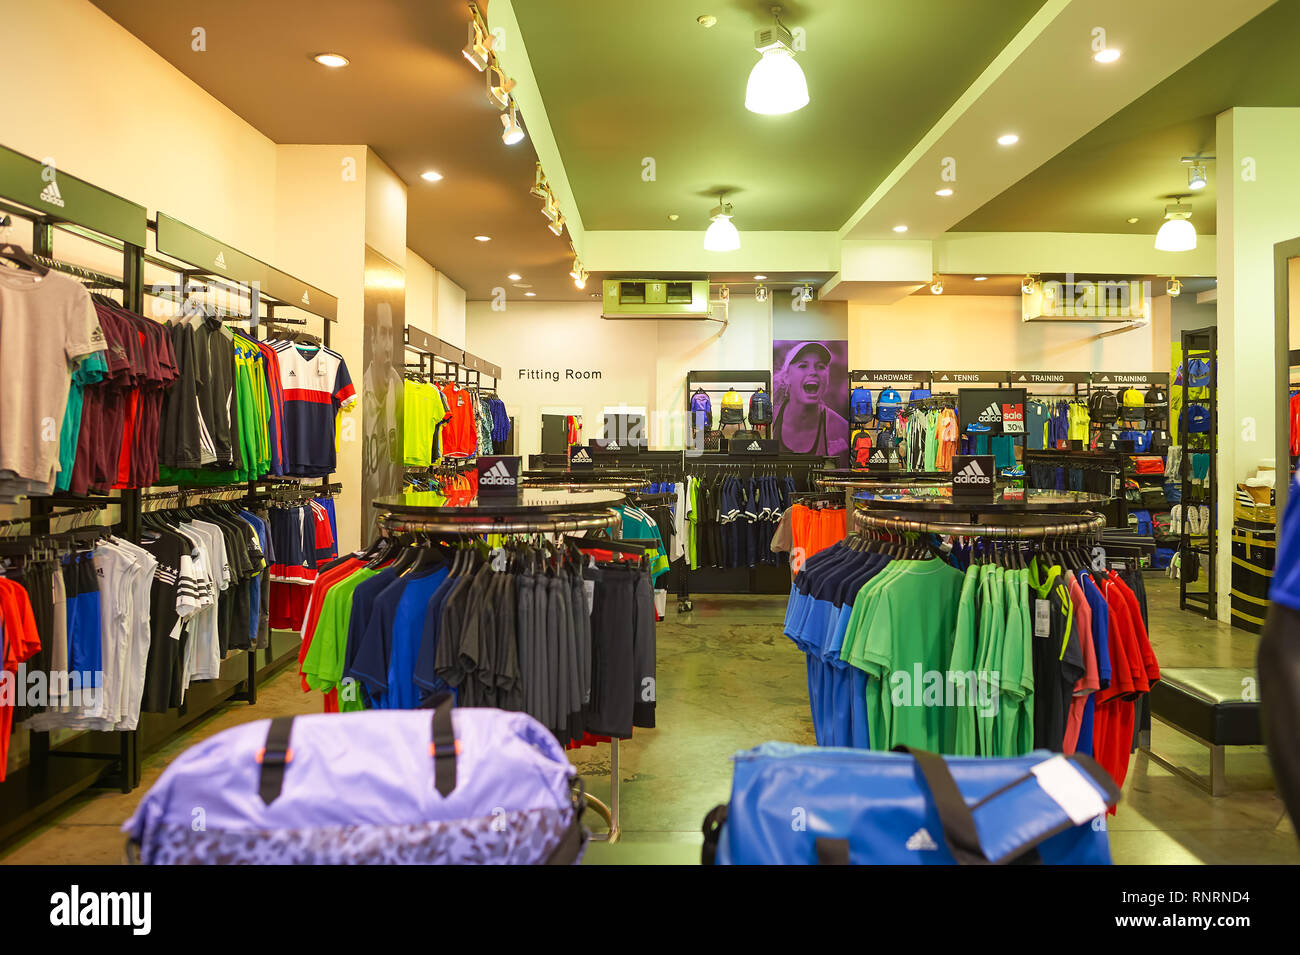 Sports Clothing Outlet High Resolution Stock Photography and Images - Alamy